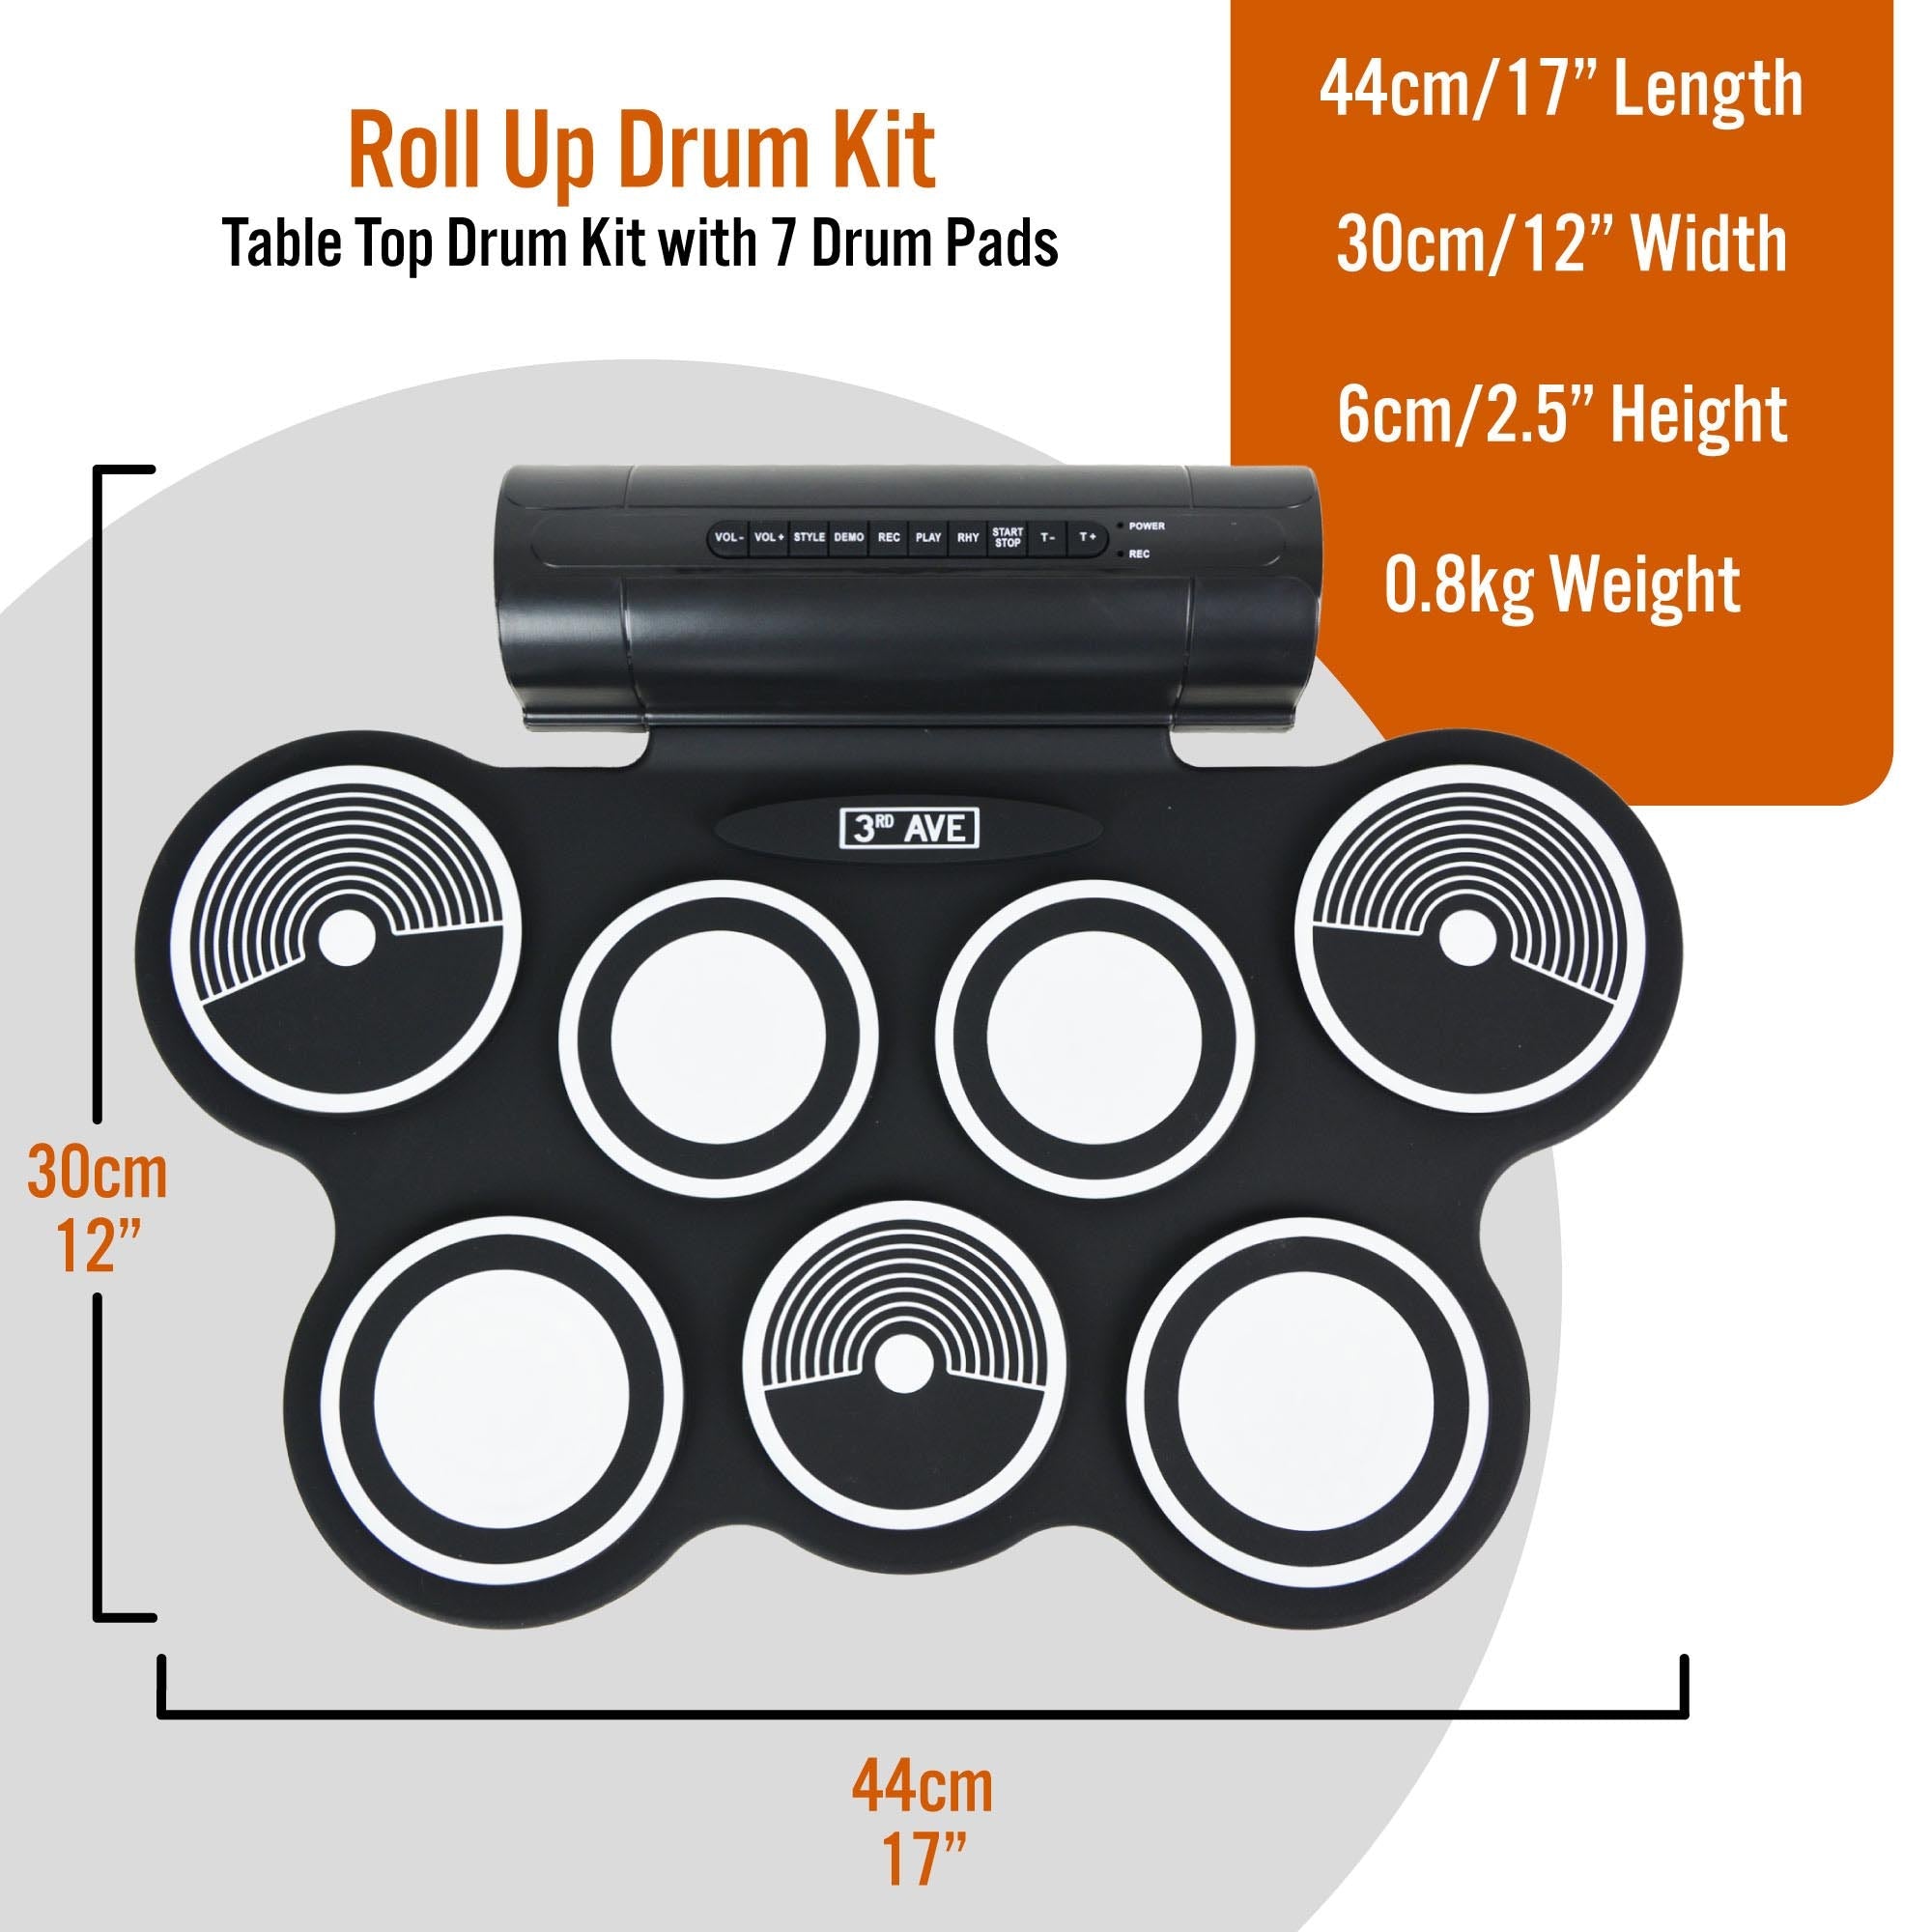 3rd Avenue Roll Up Electronic Drum Kit